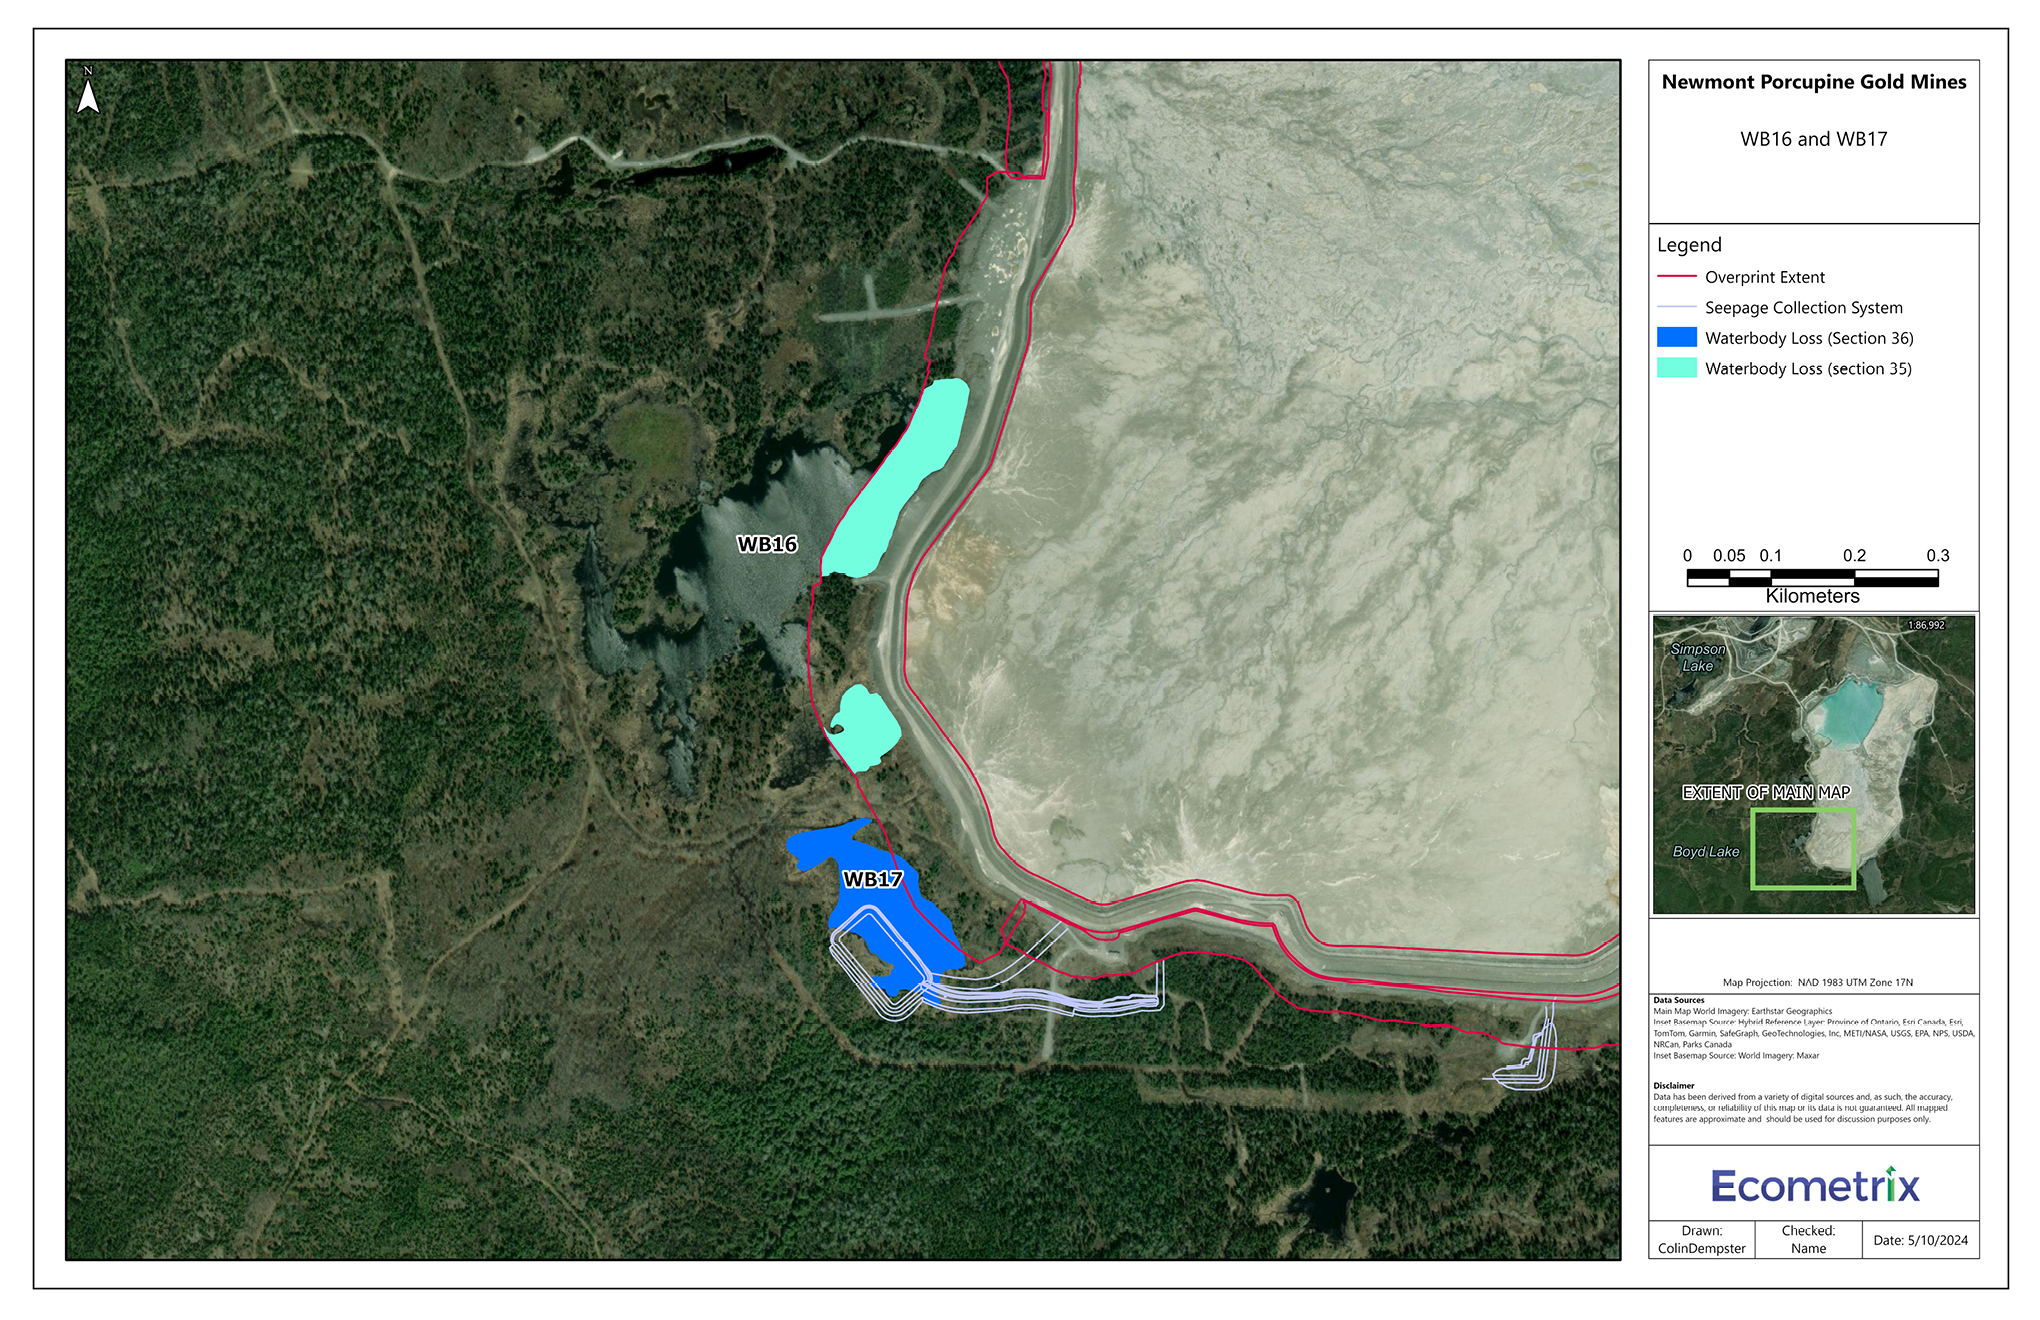 Figure 3: Location of water body WB17 to be listed in Schedule 2 of the MDMER – Text version below the image